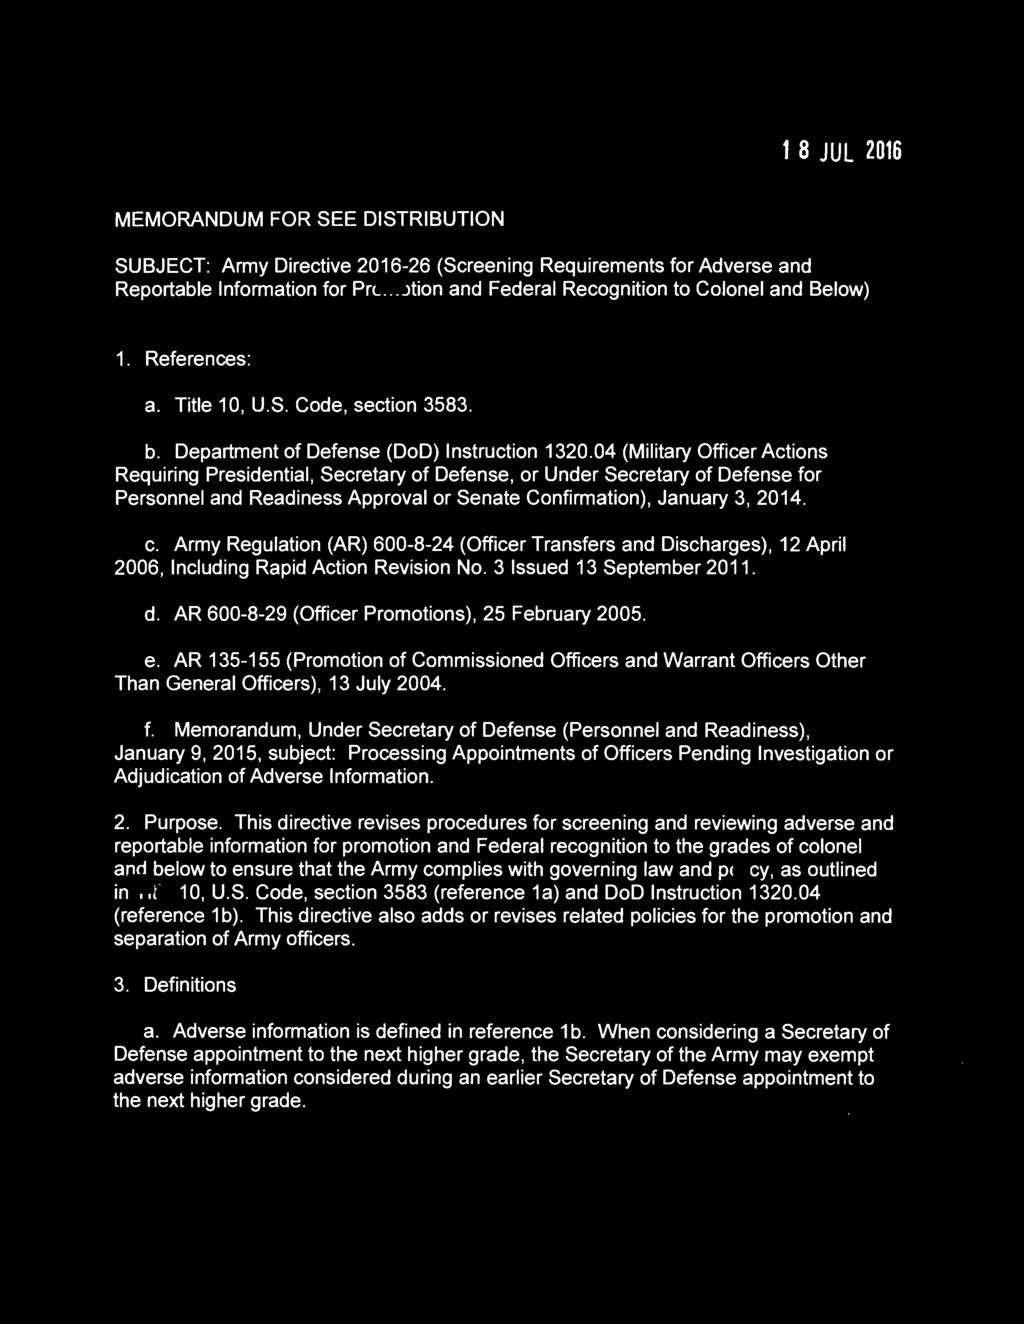 SECRETARY OF THE ARMY WASHINGTON 1 8 JUL 2016 MEMORANDUM FOR SEE DISTRIBUTION SUBJECT: Army Directive 2016-26 (Screening Requirements for Adverse and 1. References: a. Title 10, U.S. Code, section 3583.